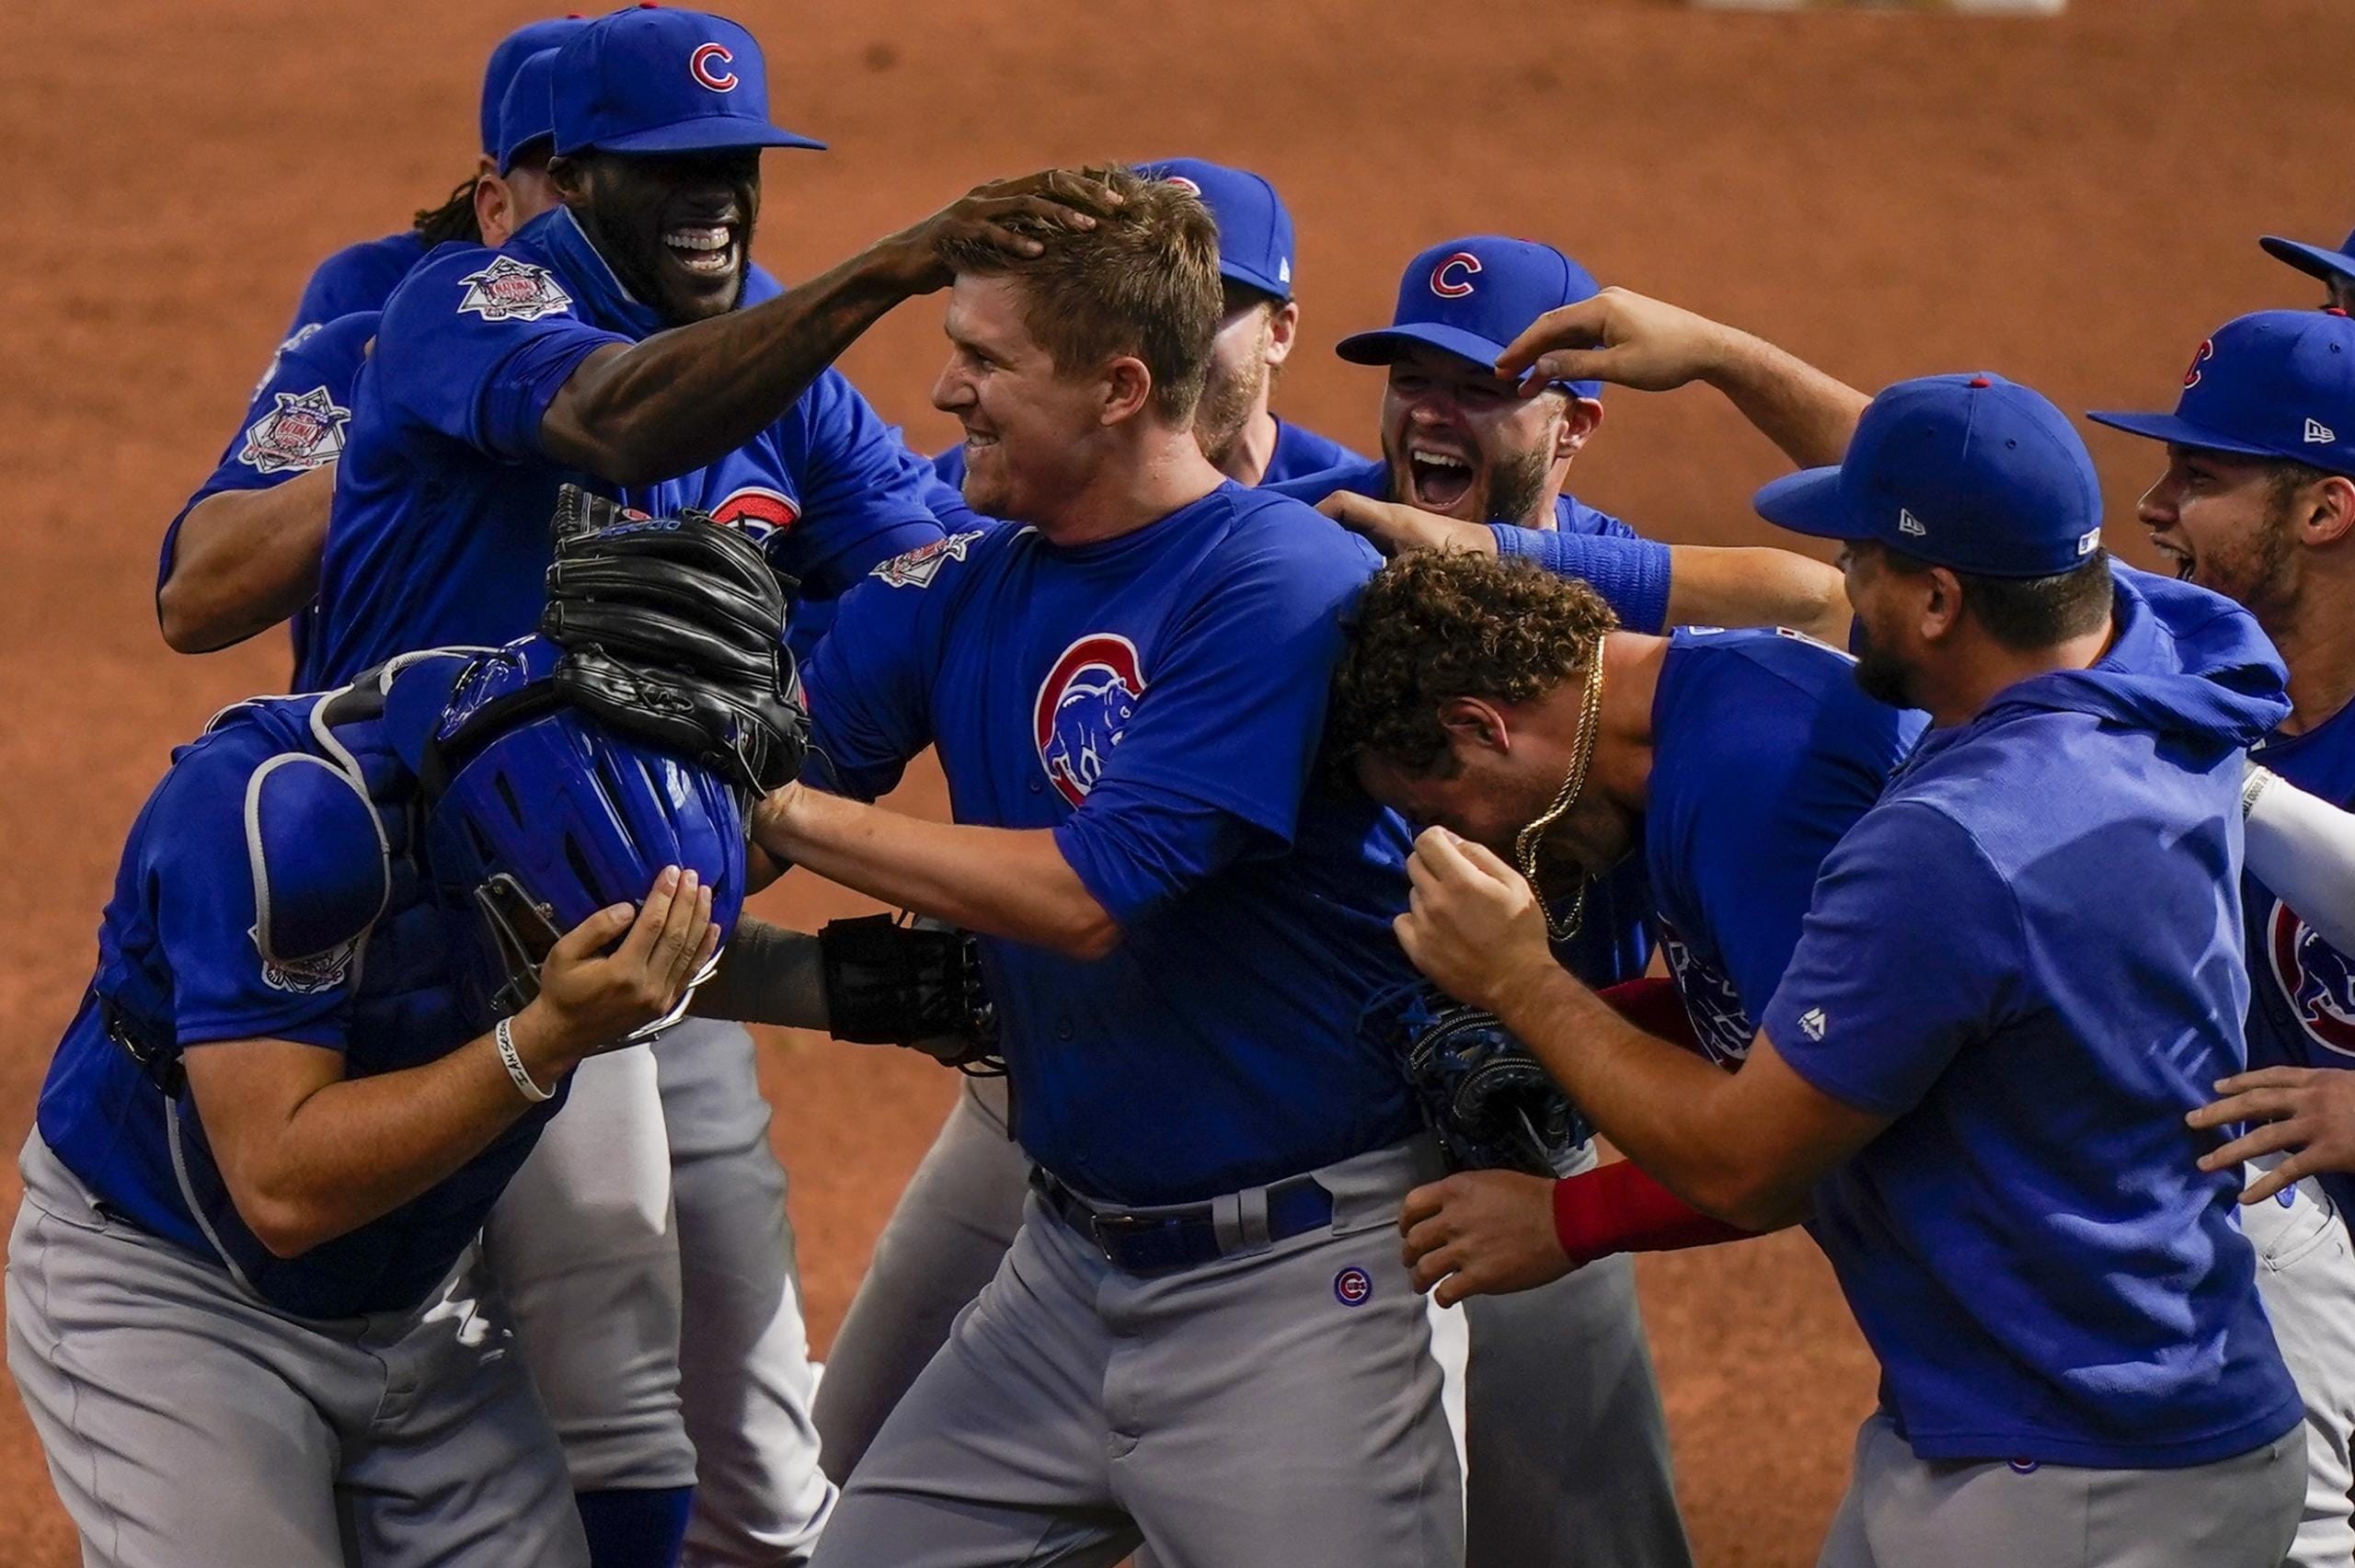 Chicago Cubs starting pitcher Alec Mills is swarmed by teammates after throwing a no hitter at a baseball game against the Milwaukee Brewers Sunday, Sept. 13, 2020, in Milwaukee. The Cubs won 12-0.